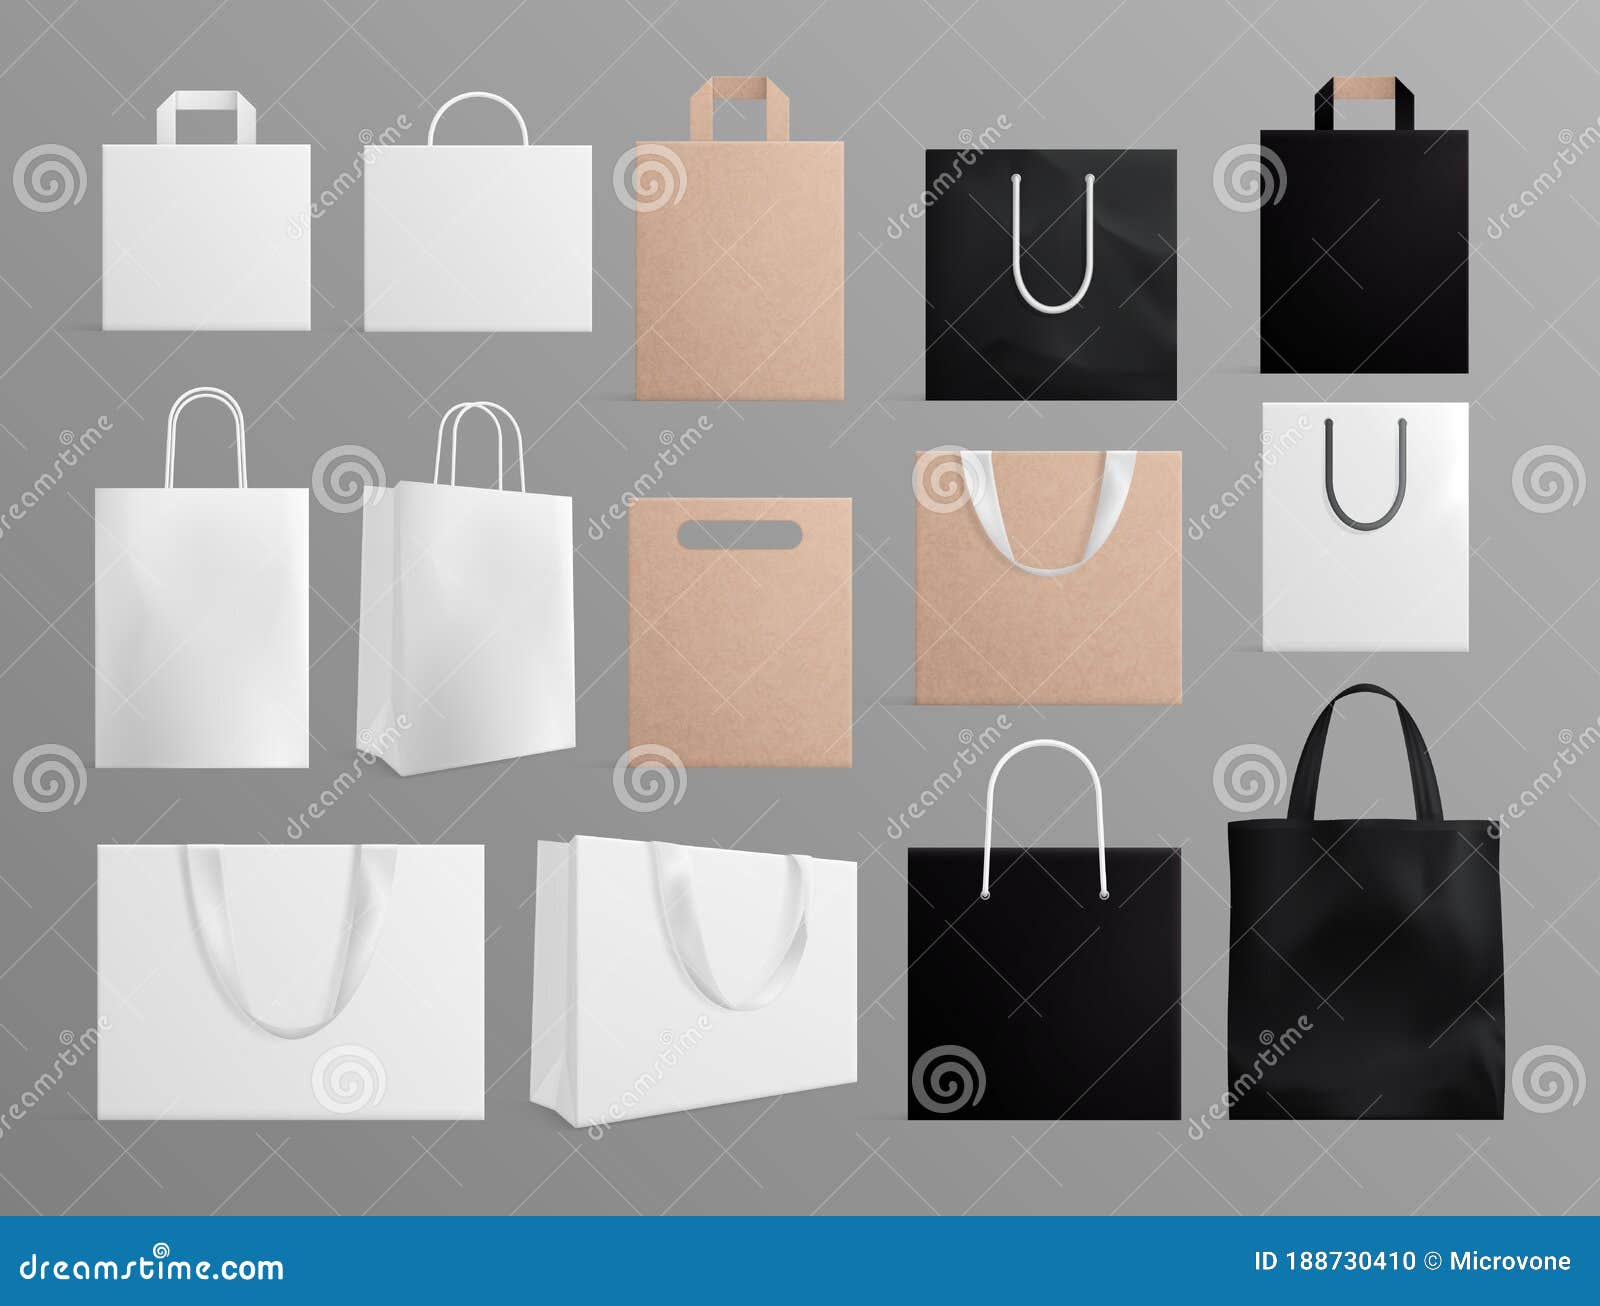 Download Black White Shopping Stock Illustrations 73 723 Black White Shopping Stock Illustrations Vectors Clipart Dreamstime